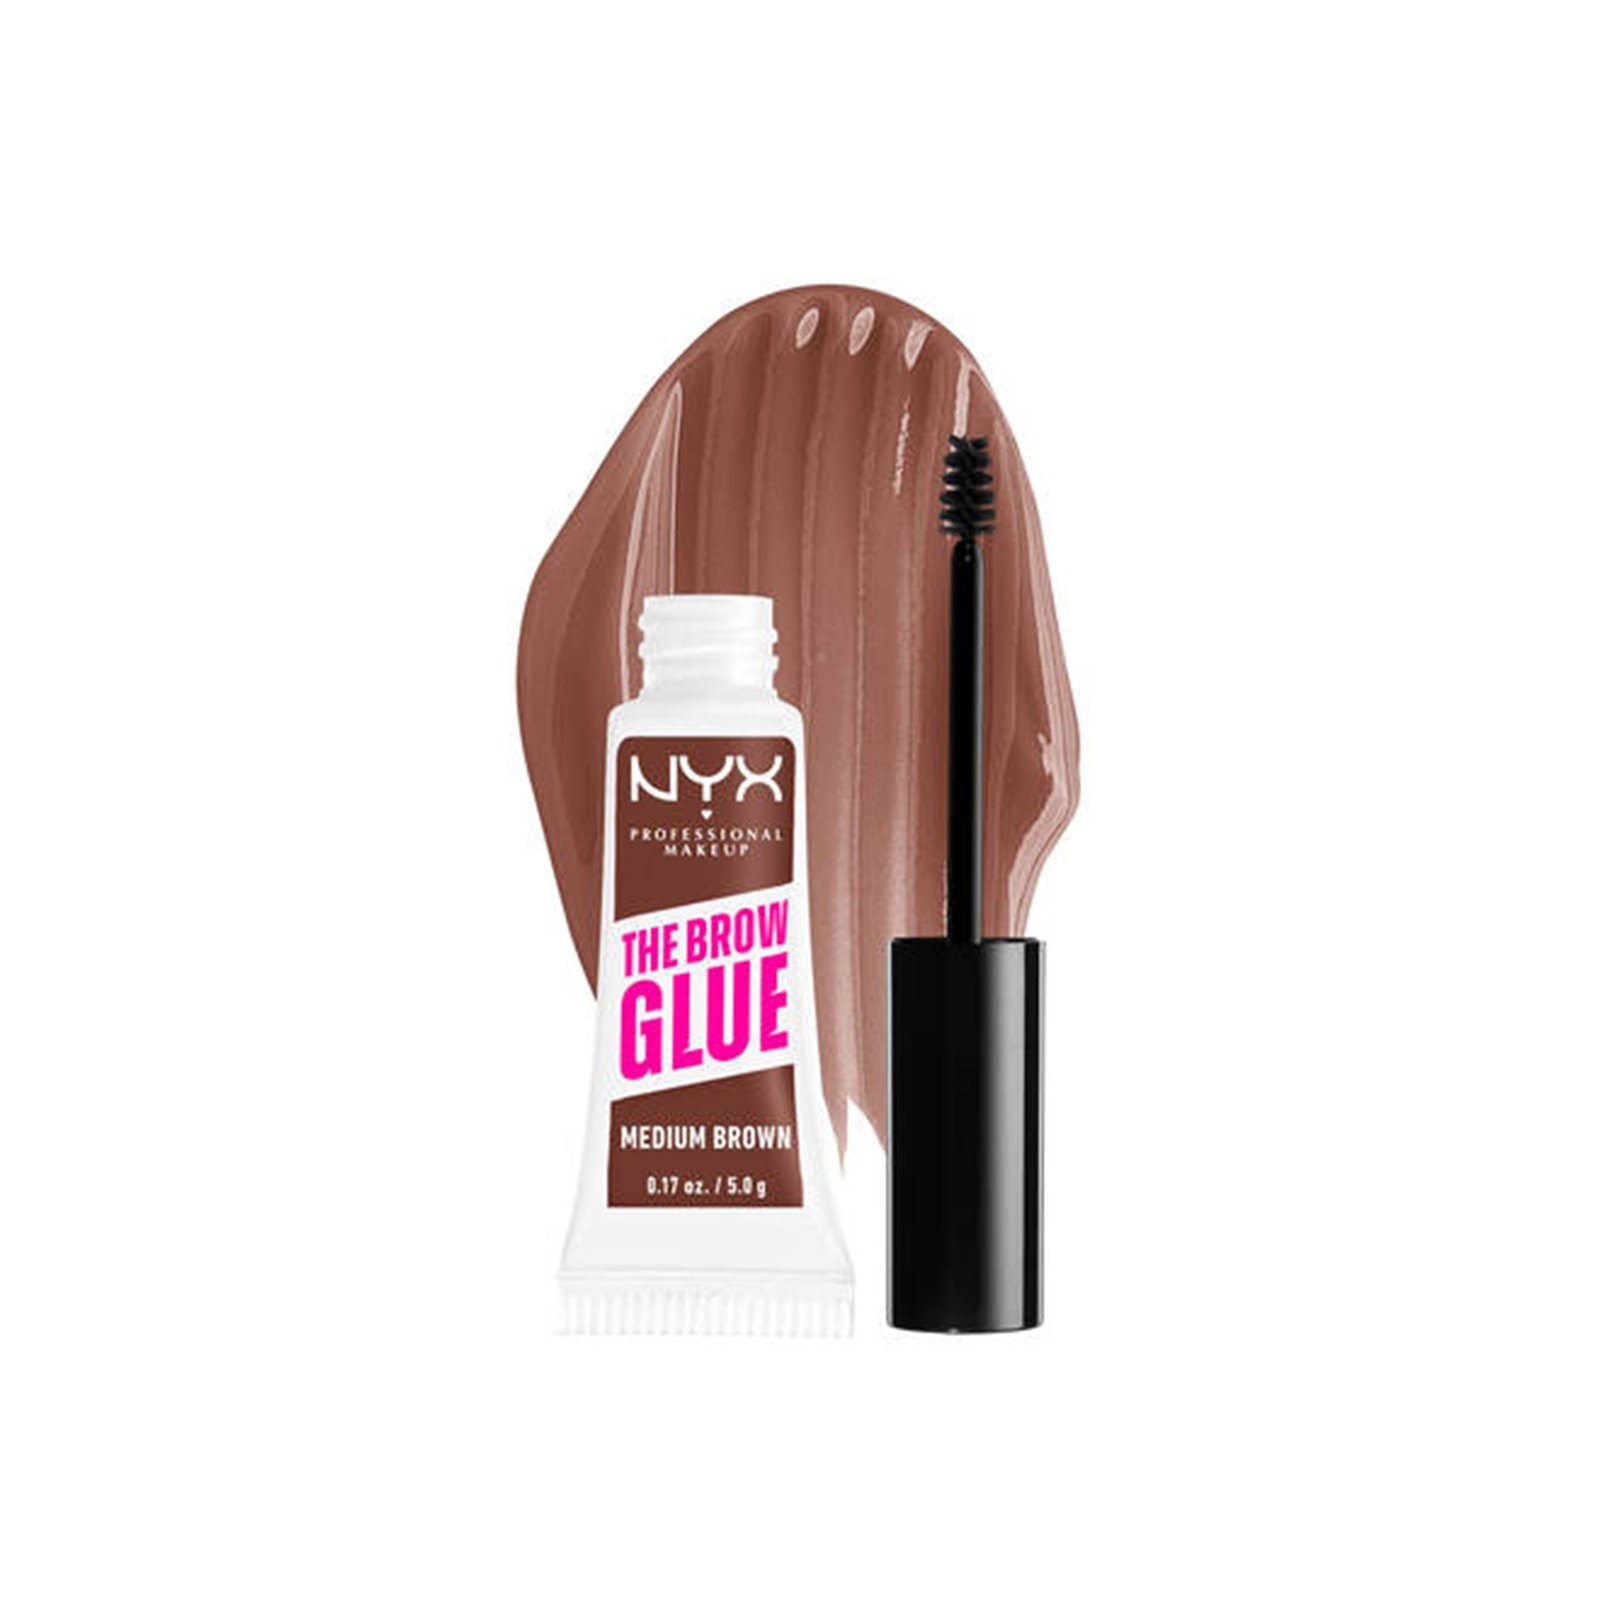 Brow The · Buy Brow Glue USA Instant Pro Makeup NYX Styler